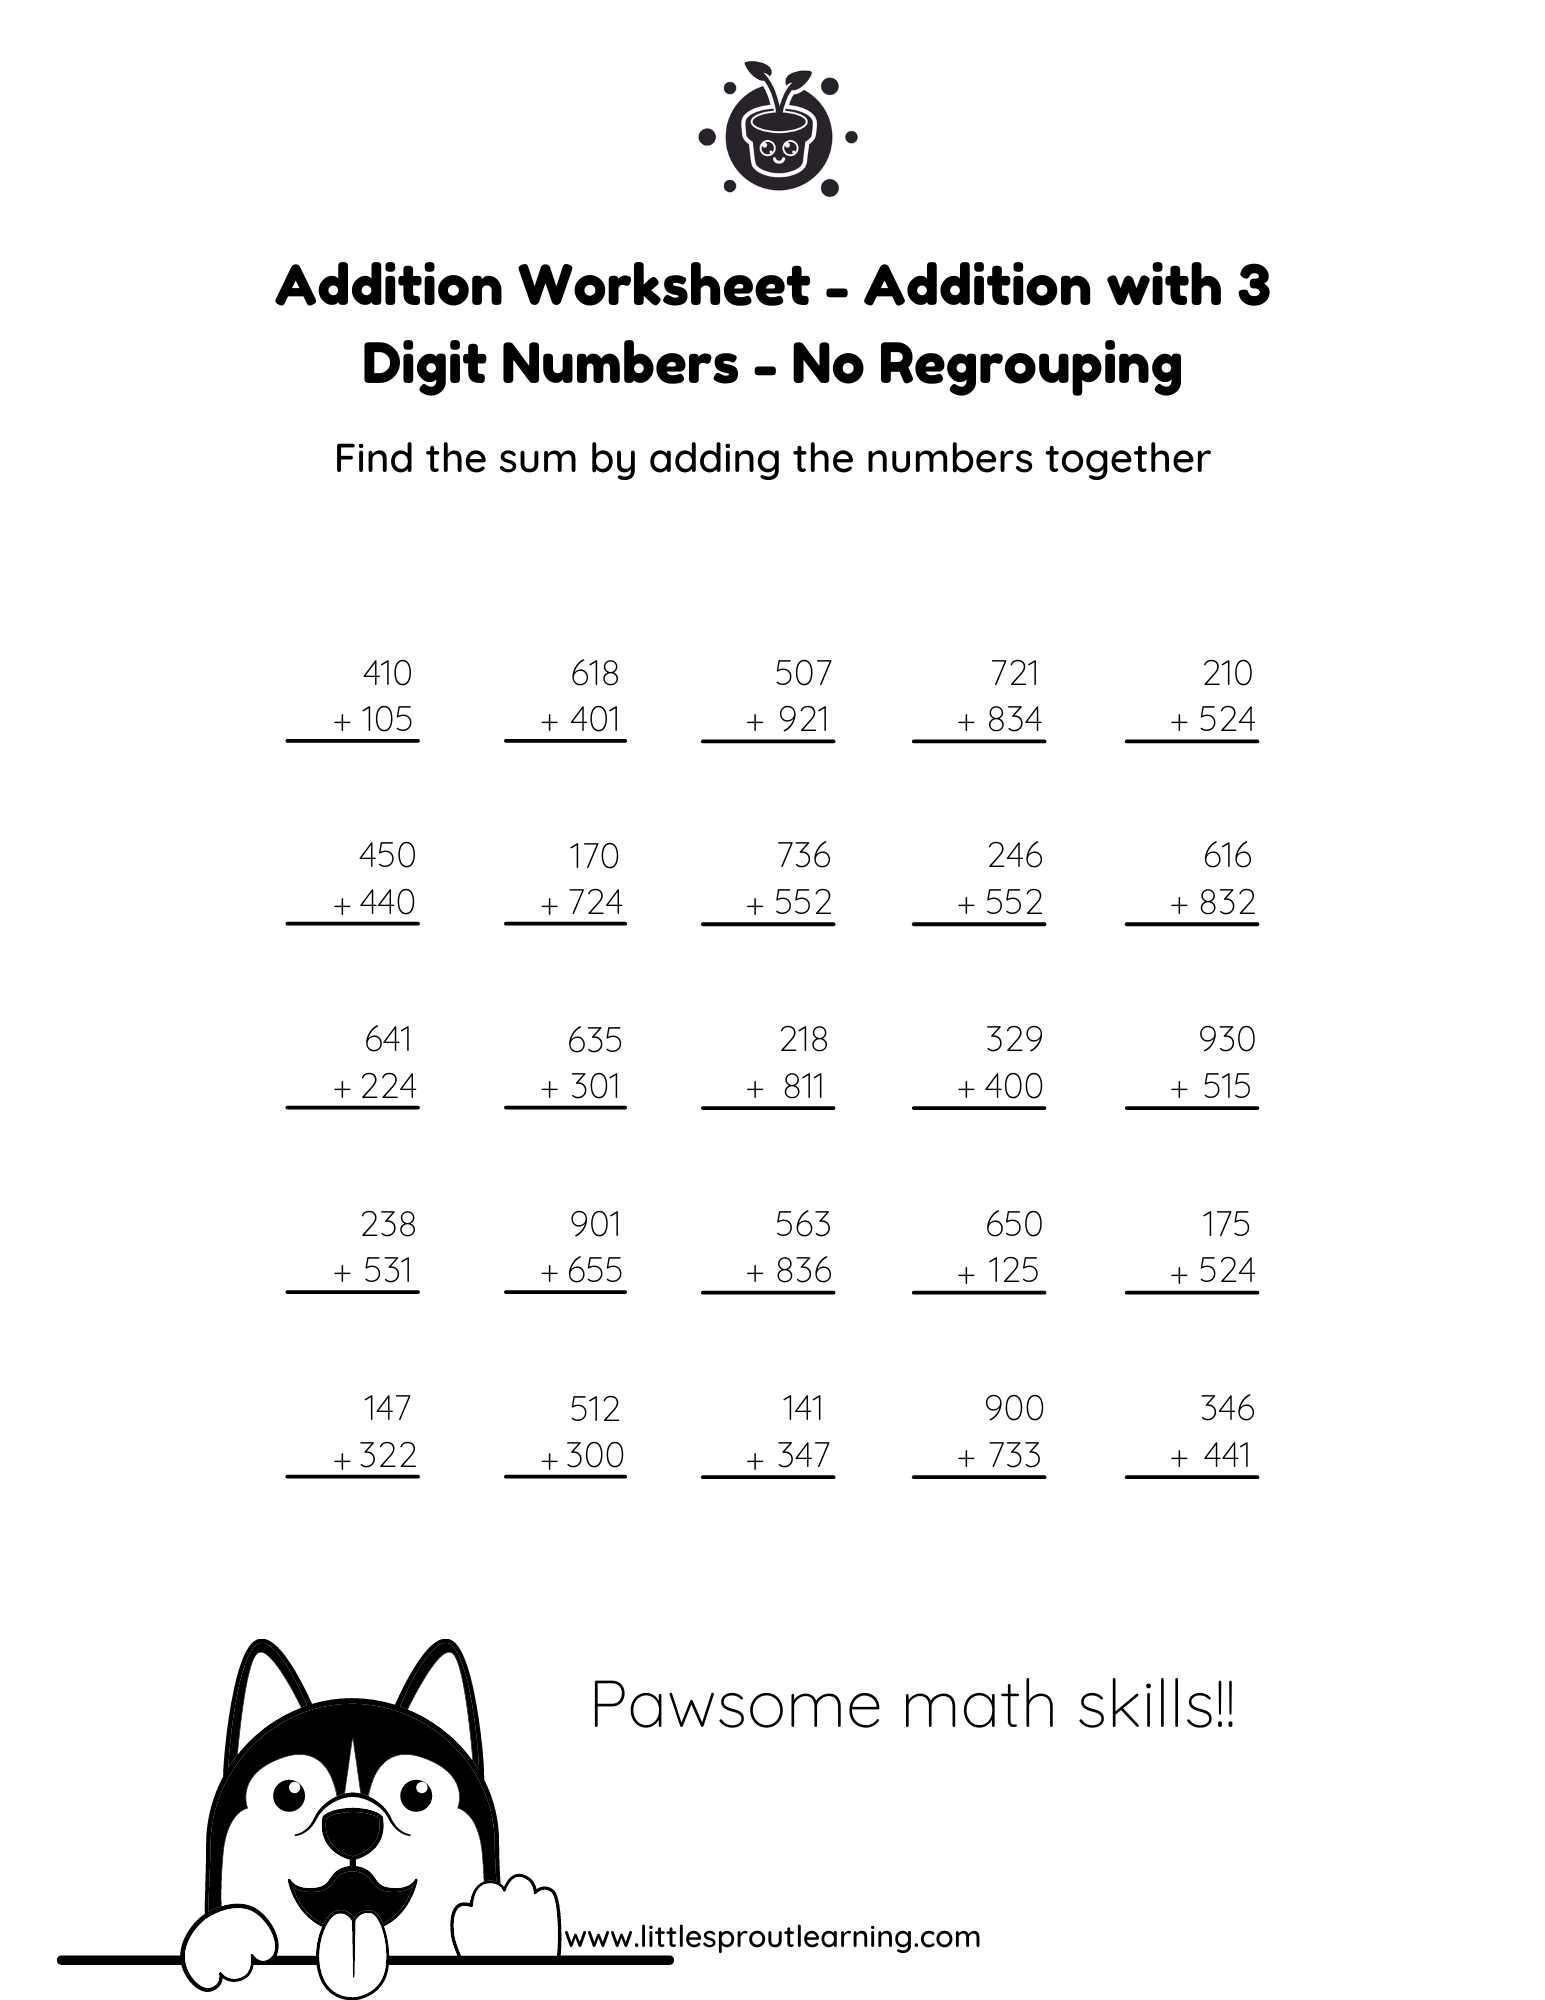 Addition with 3 Digit Numbers Worksheet